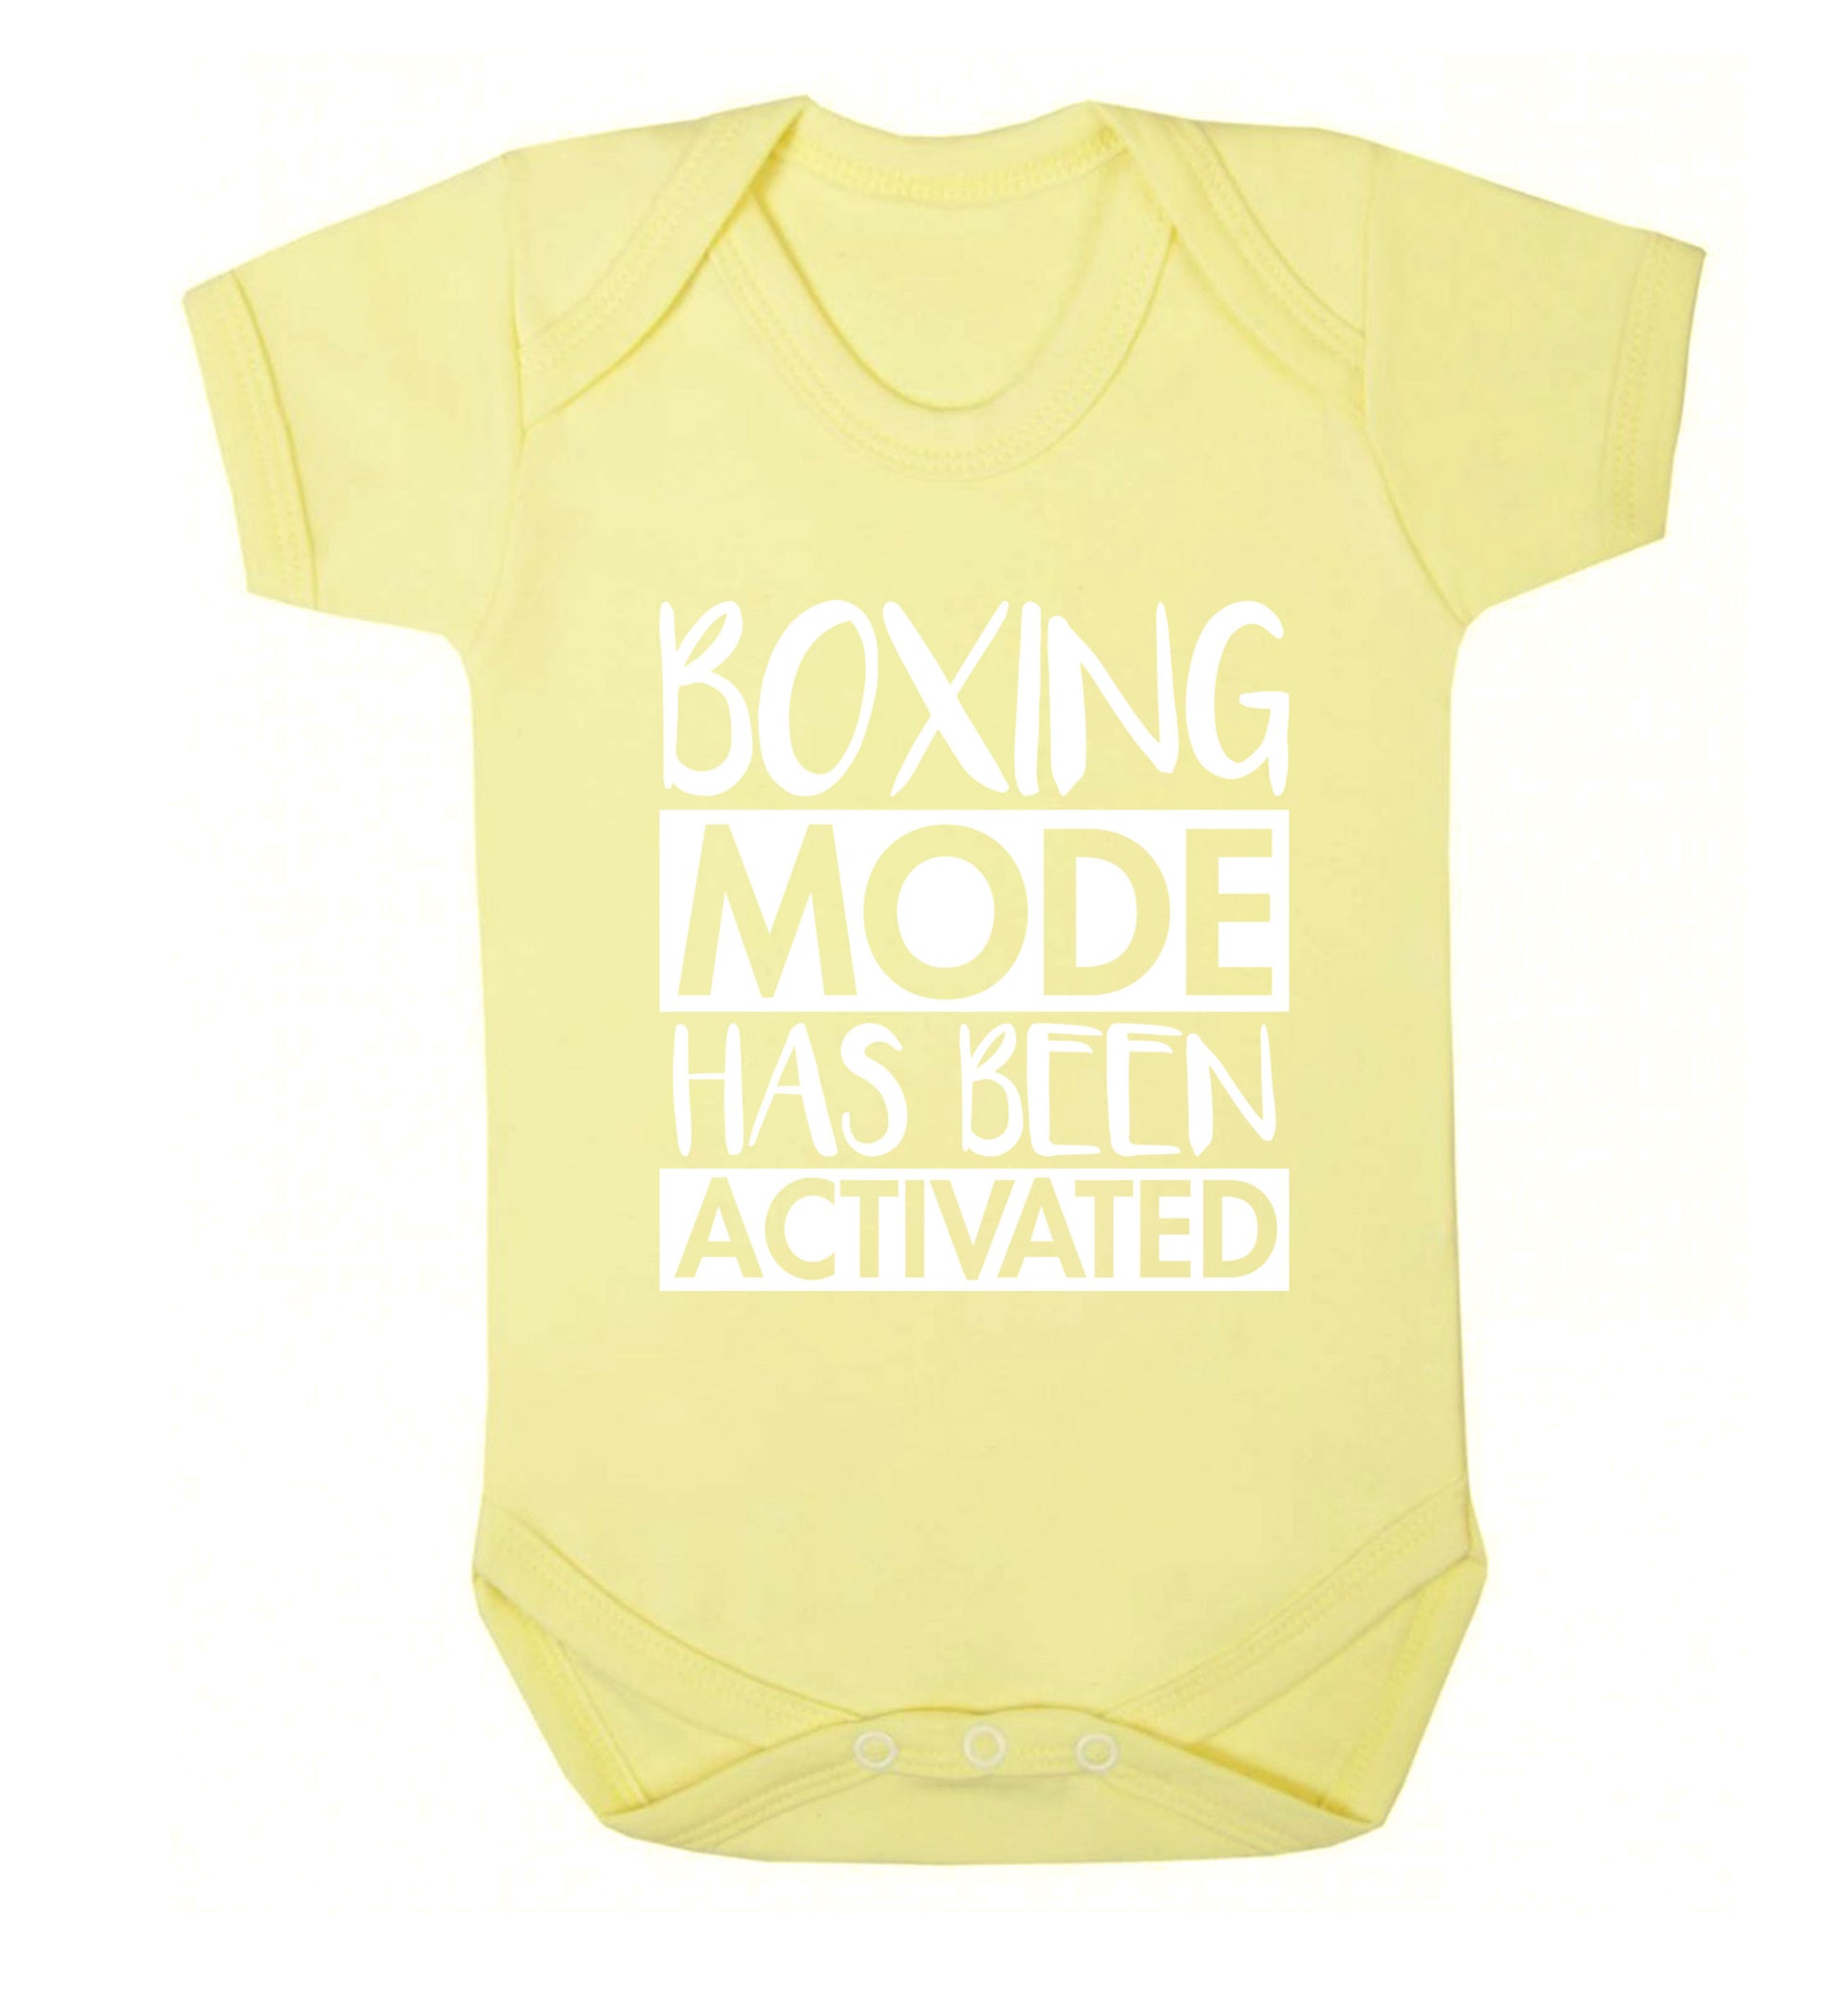 Boxing mode activated Baby Vest pale yellow 18-24 months